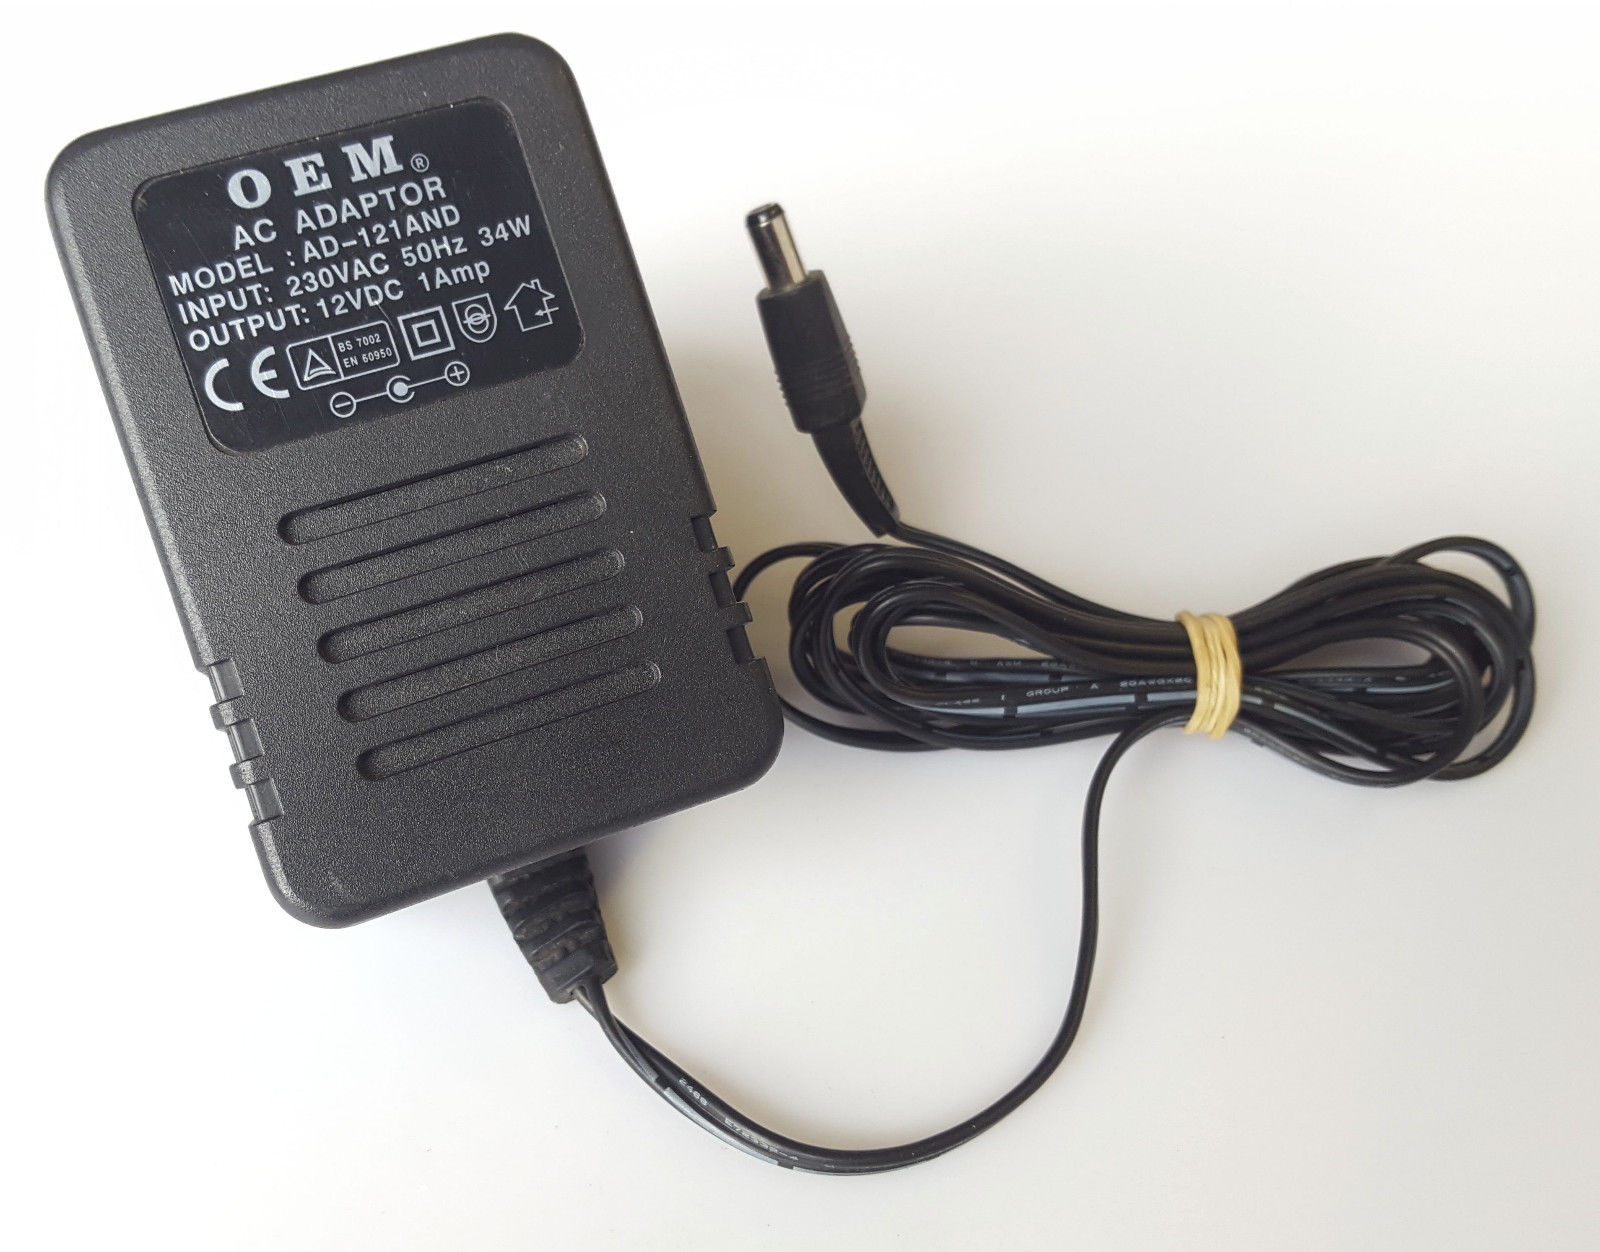 *Brand NEW*OEM 12V 1.0A AC/DC ADAPTER AD-121AND POWER SUPPLY